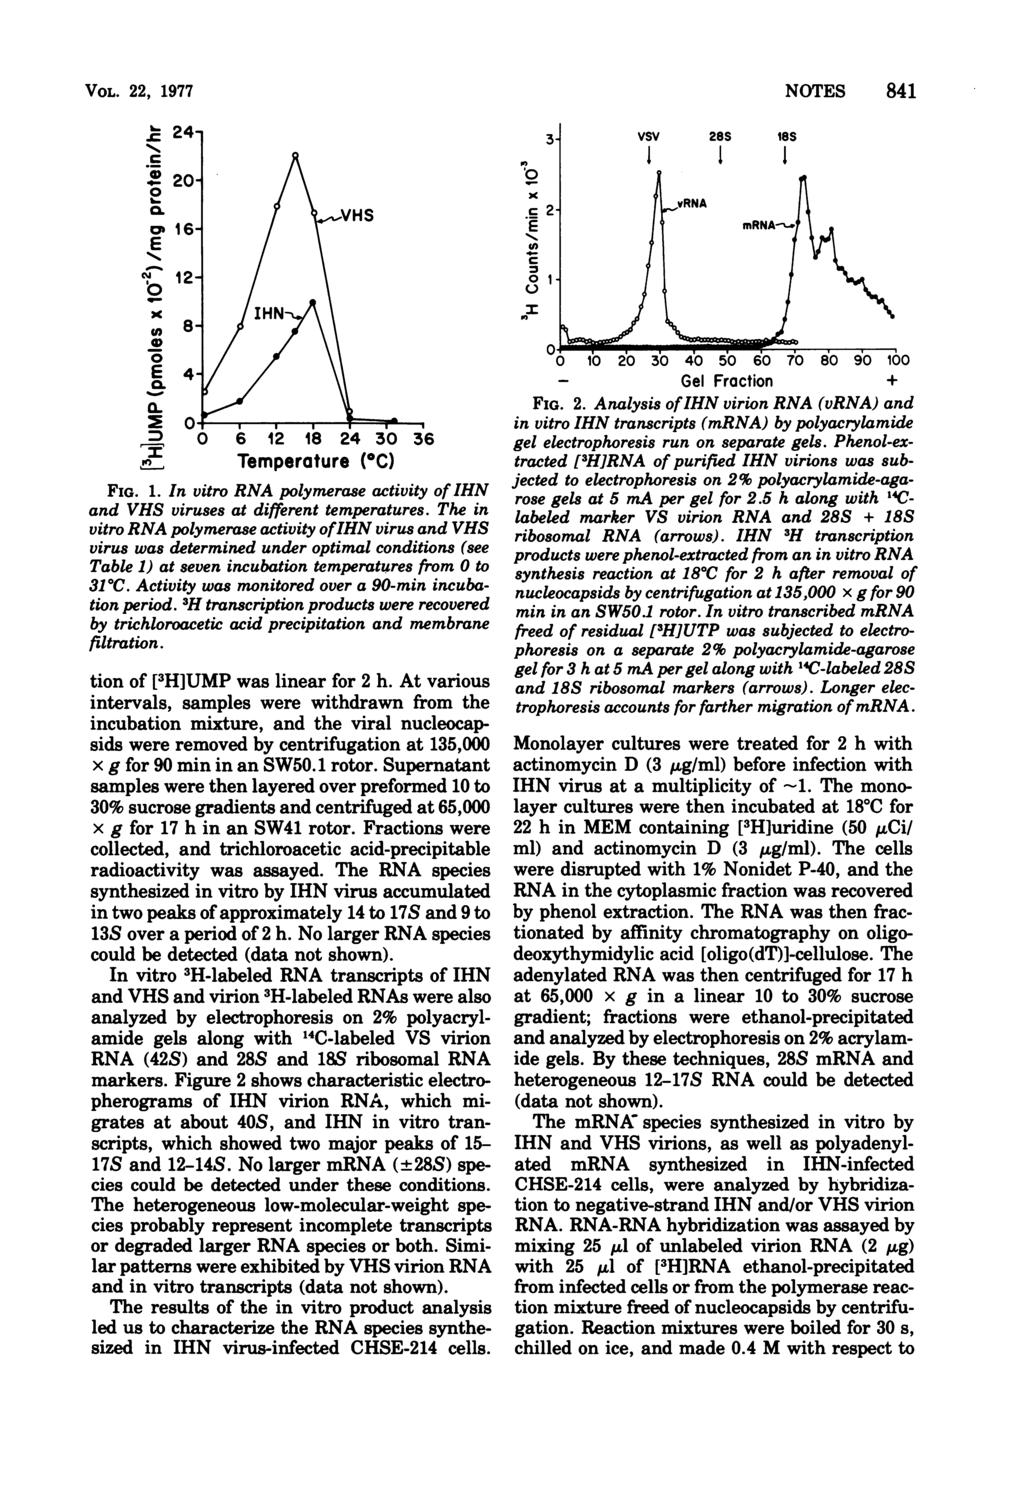 VOL. 22, 1977 24-.@20-0 E. 1VHS EG 12- x E4 - ~~HN 0~ D 0 6 12 18 24 30 Temperature (OC) 36 FIG. 1. In vitro RNA polymerase activity of IHN and VHS viruses at different temperatures.